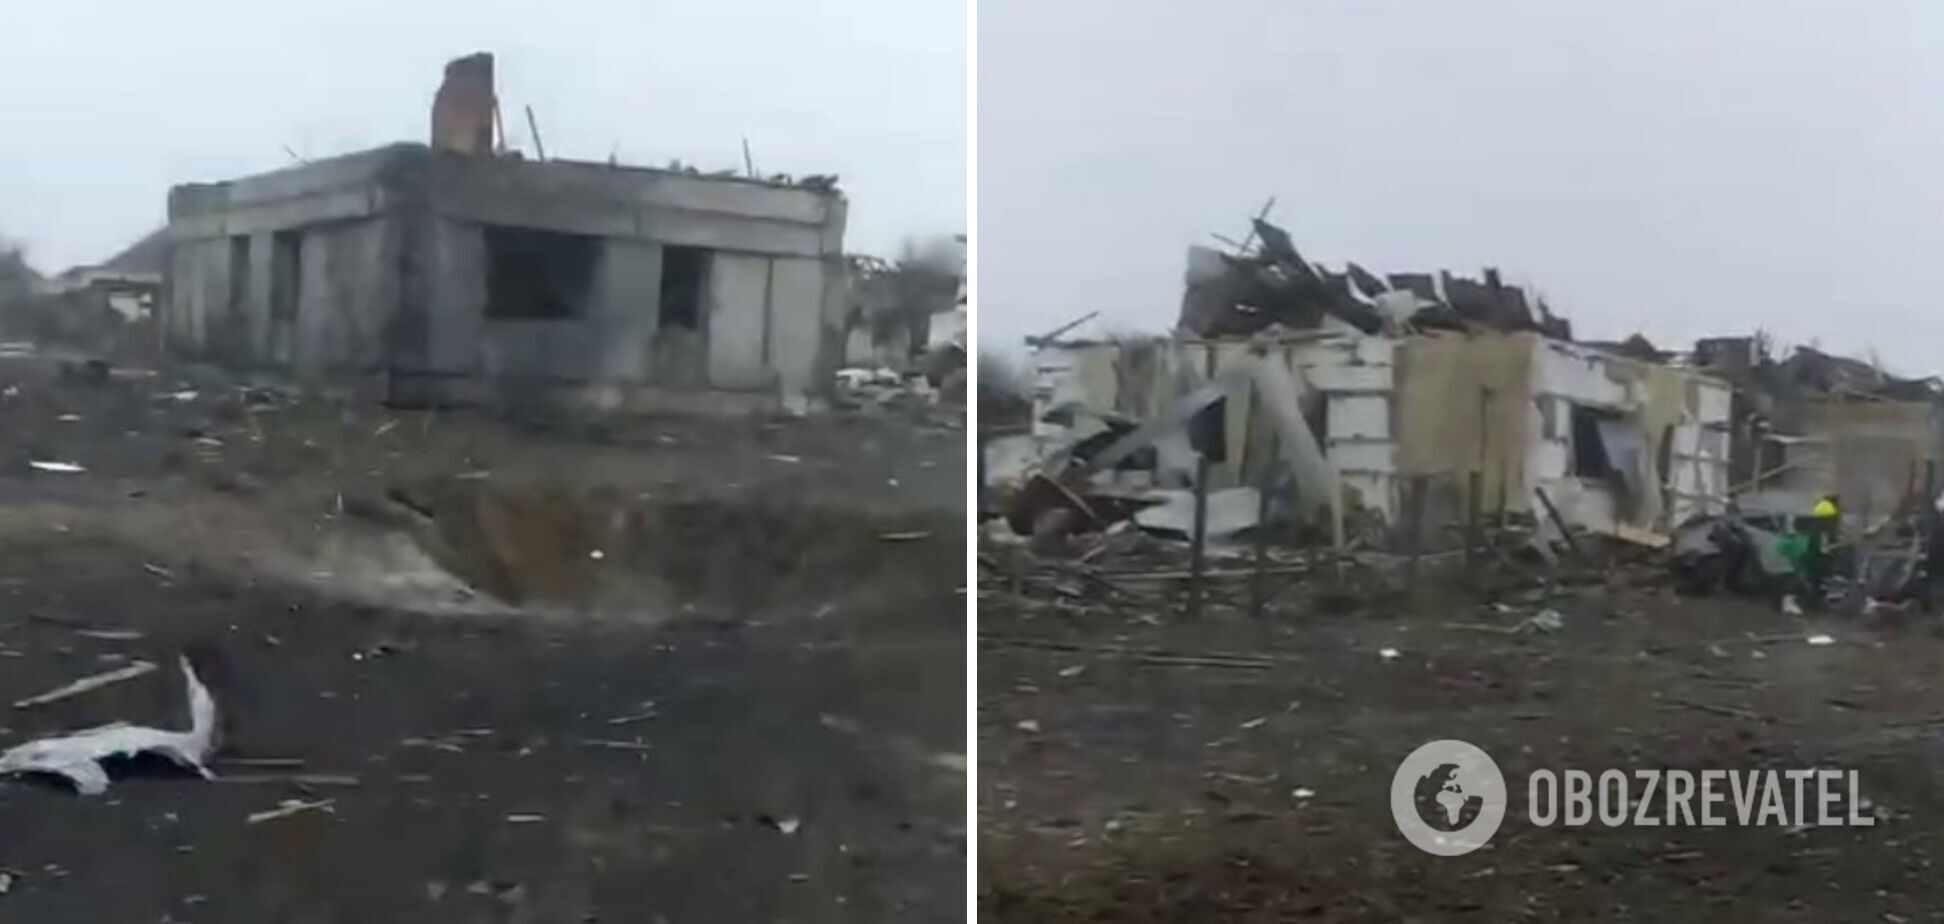 ''All burned'': one of the missiles fired at Ukraine fell on the village in Voronezh region, destroying and damaging many houses